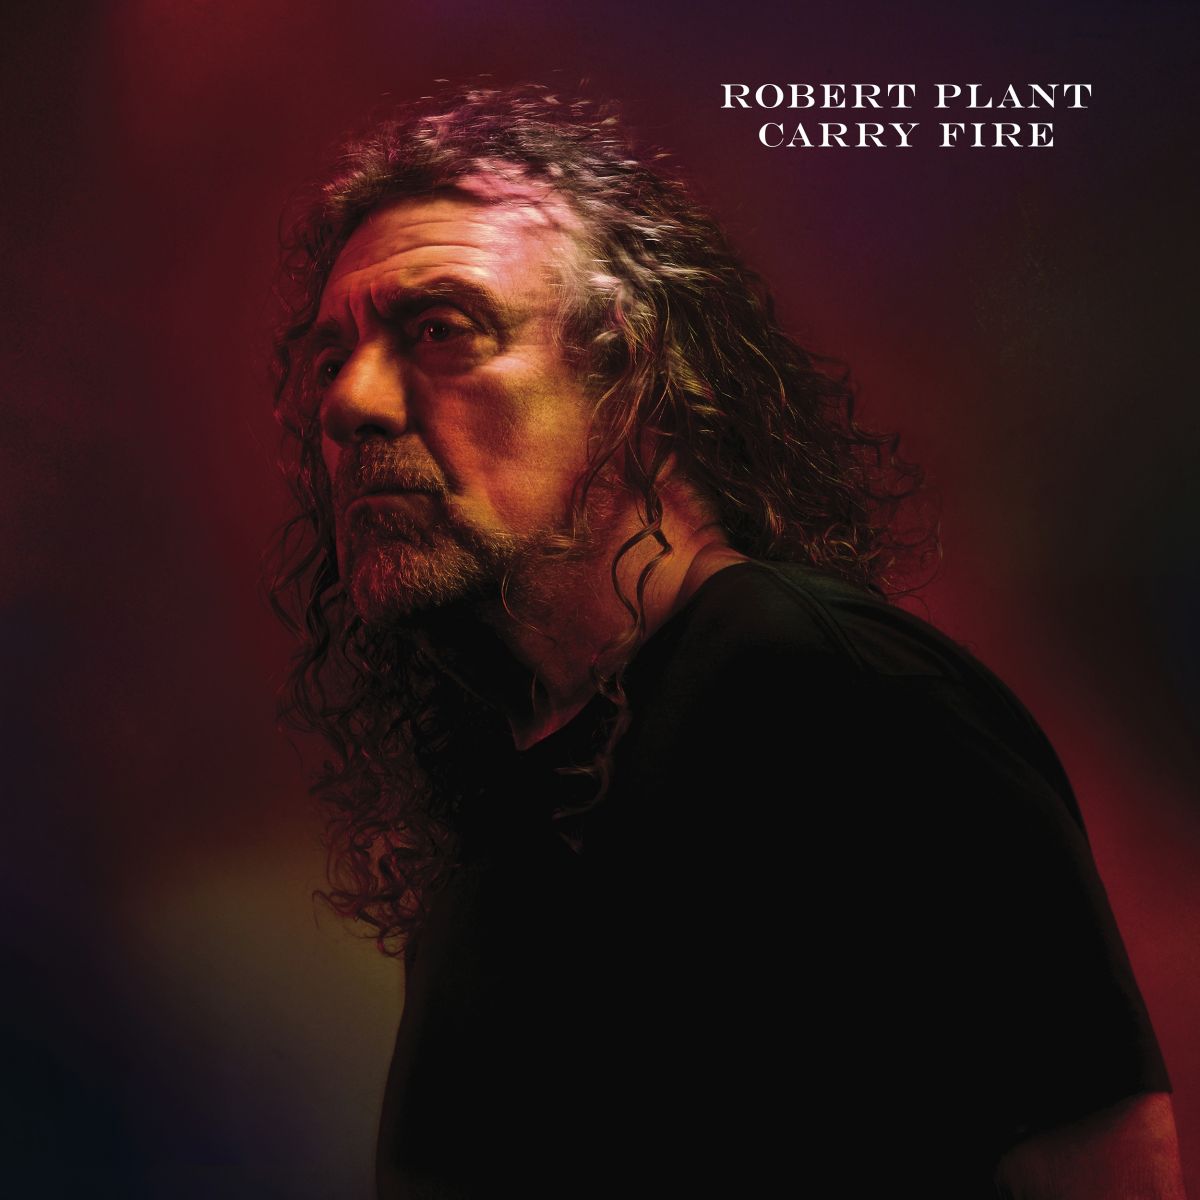 Robert Plant to play at The Colston Hall in Bristol